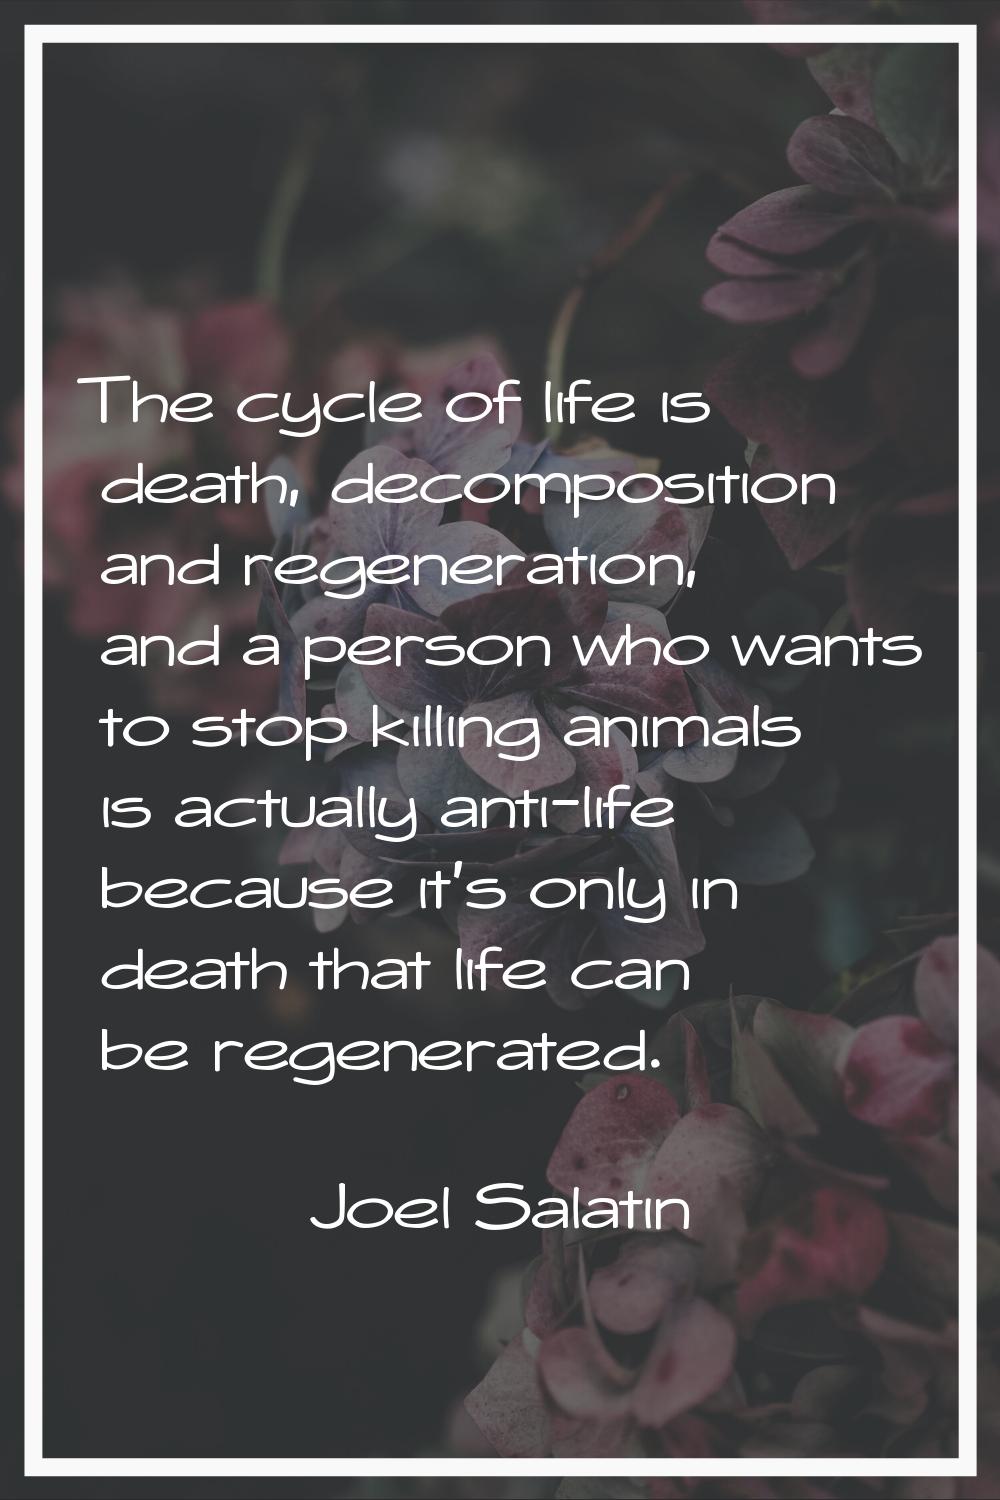 The cycle of life is death, decomposition and regeneration, and a person who wants to stop killing 